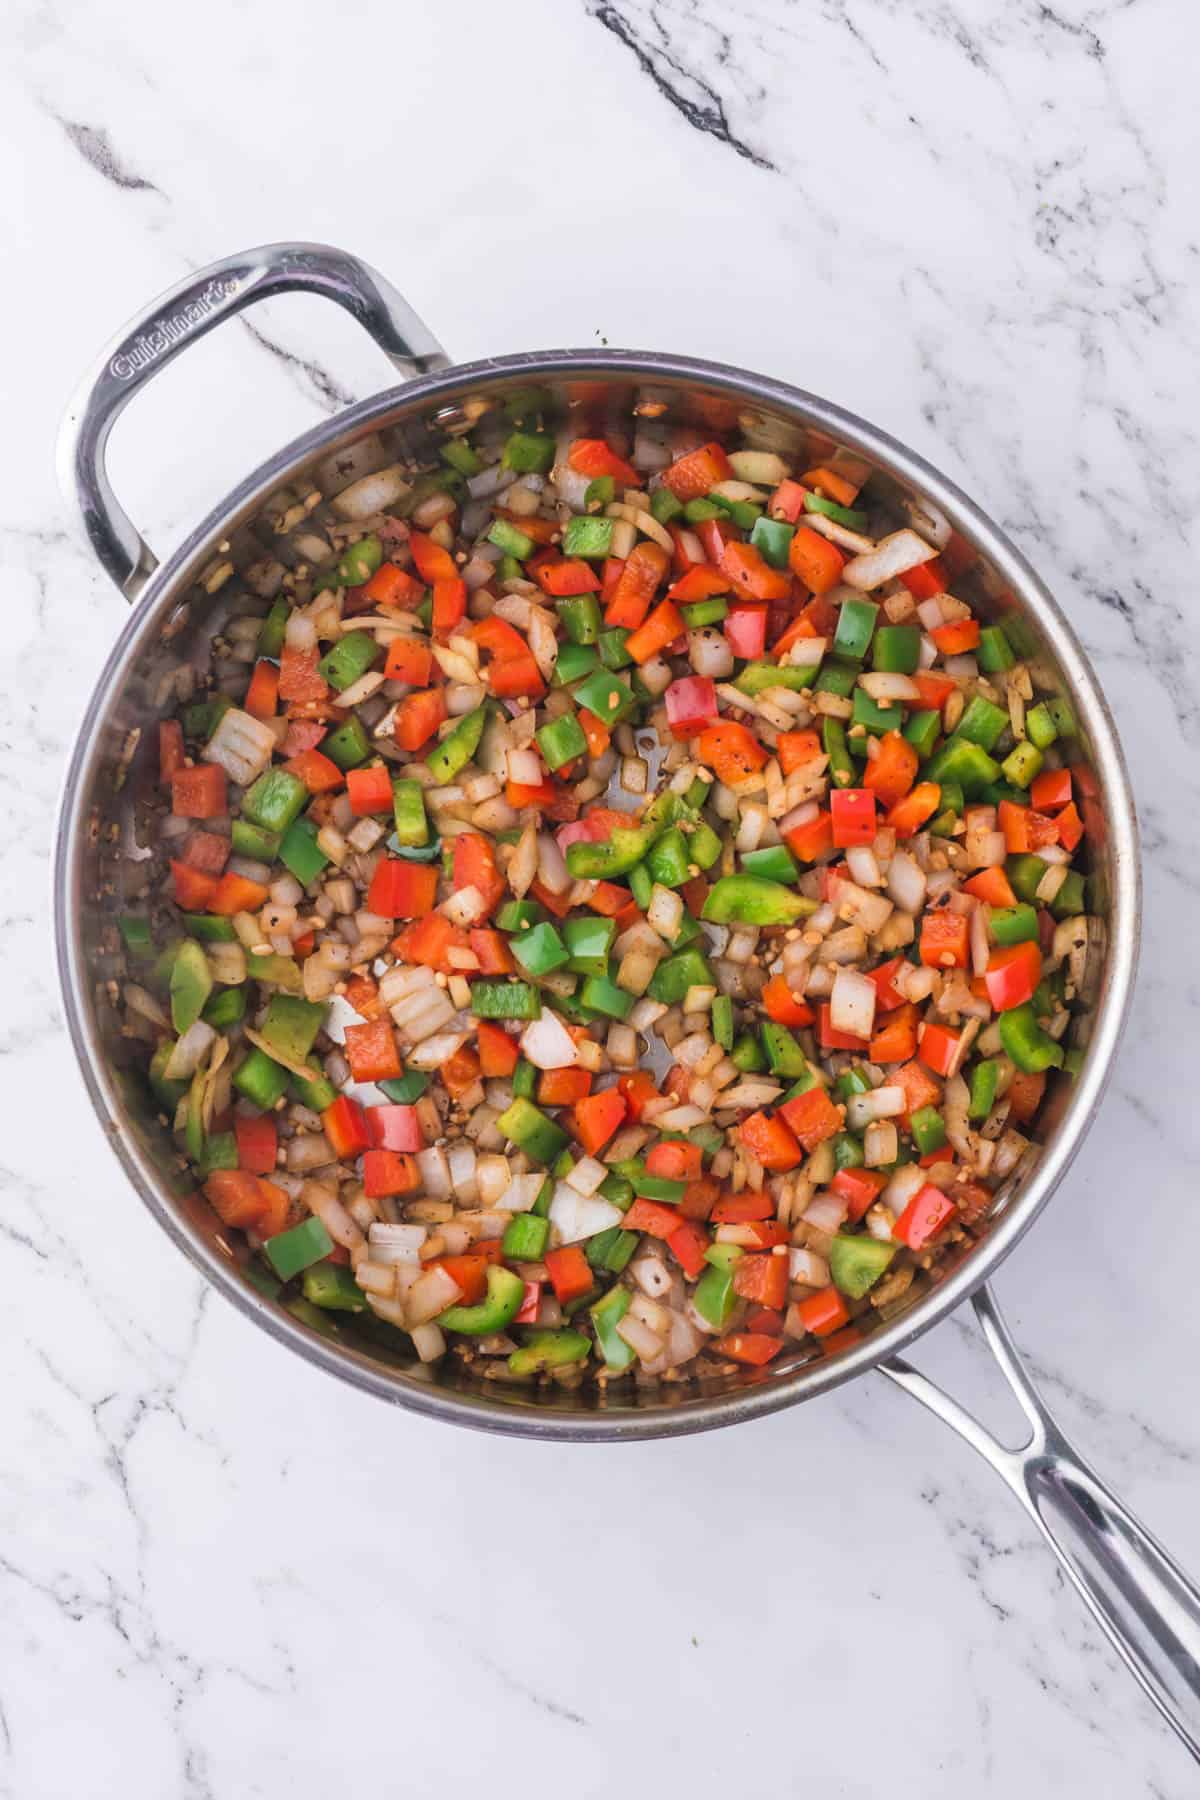 Sauteeing diced vegetables in a pan.